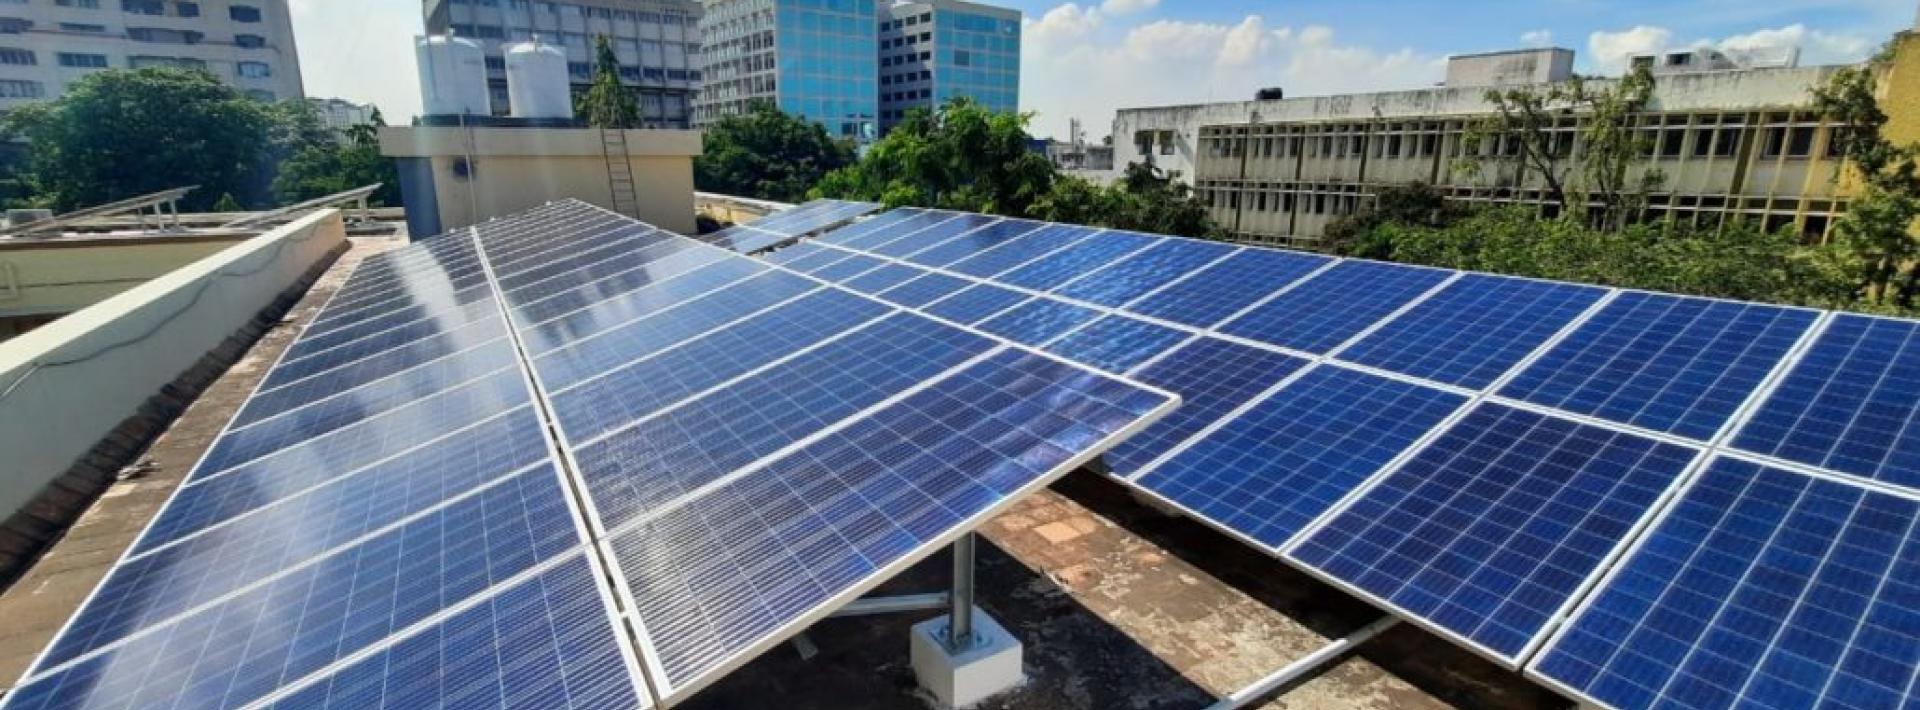 Banner image: According to a Greenpeace India report released in April 2018, the total rooftop solar potential of Chennai is 1,380 MW. A big share of this, nearly 46%, can come from the residential sector. / Credit: Laasya Shekhar